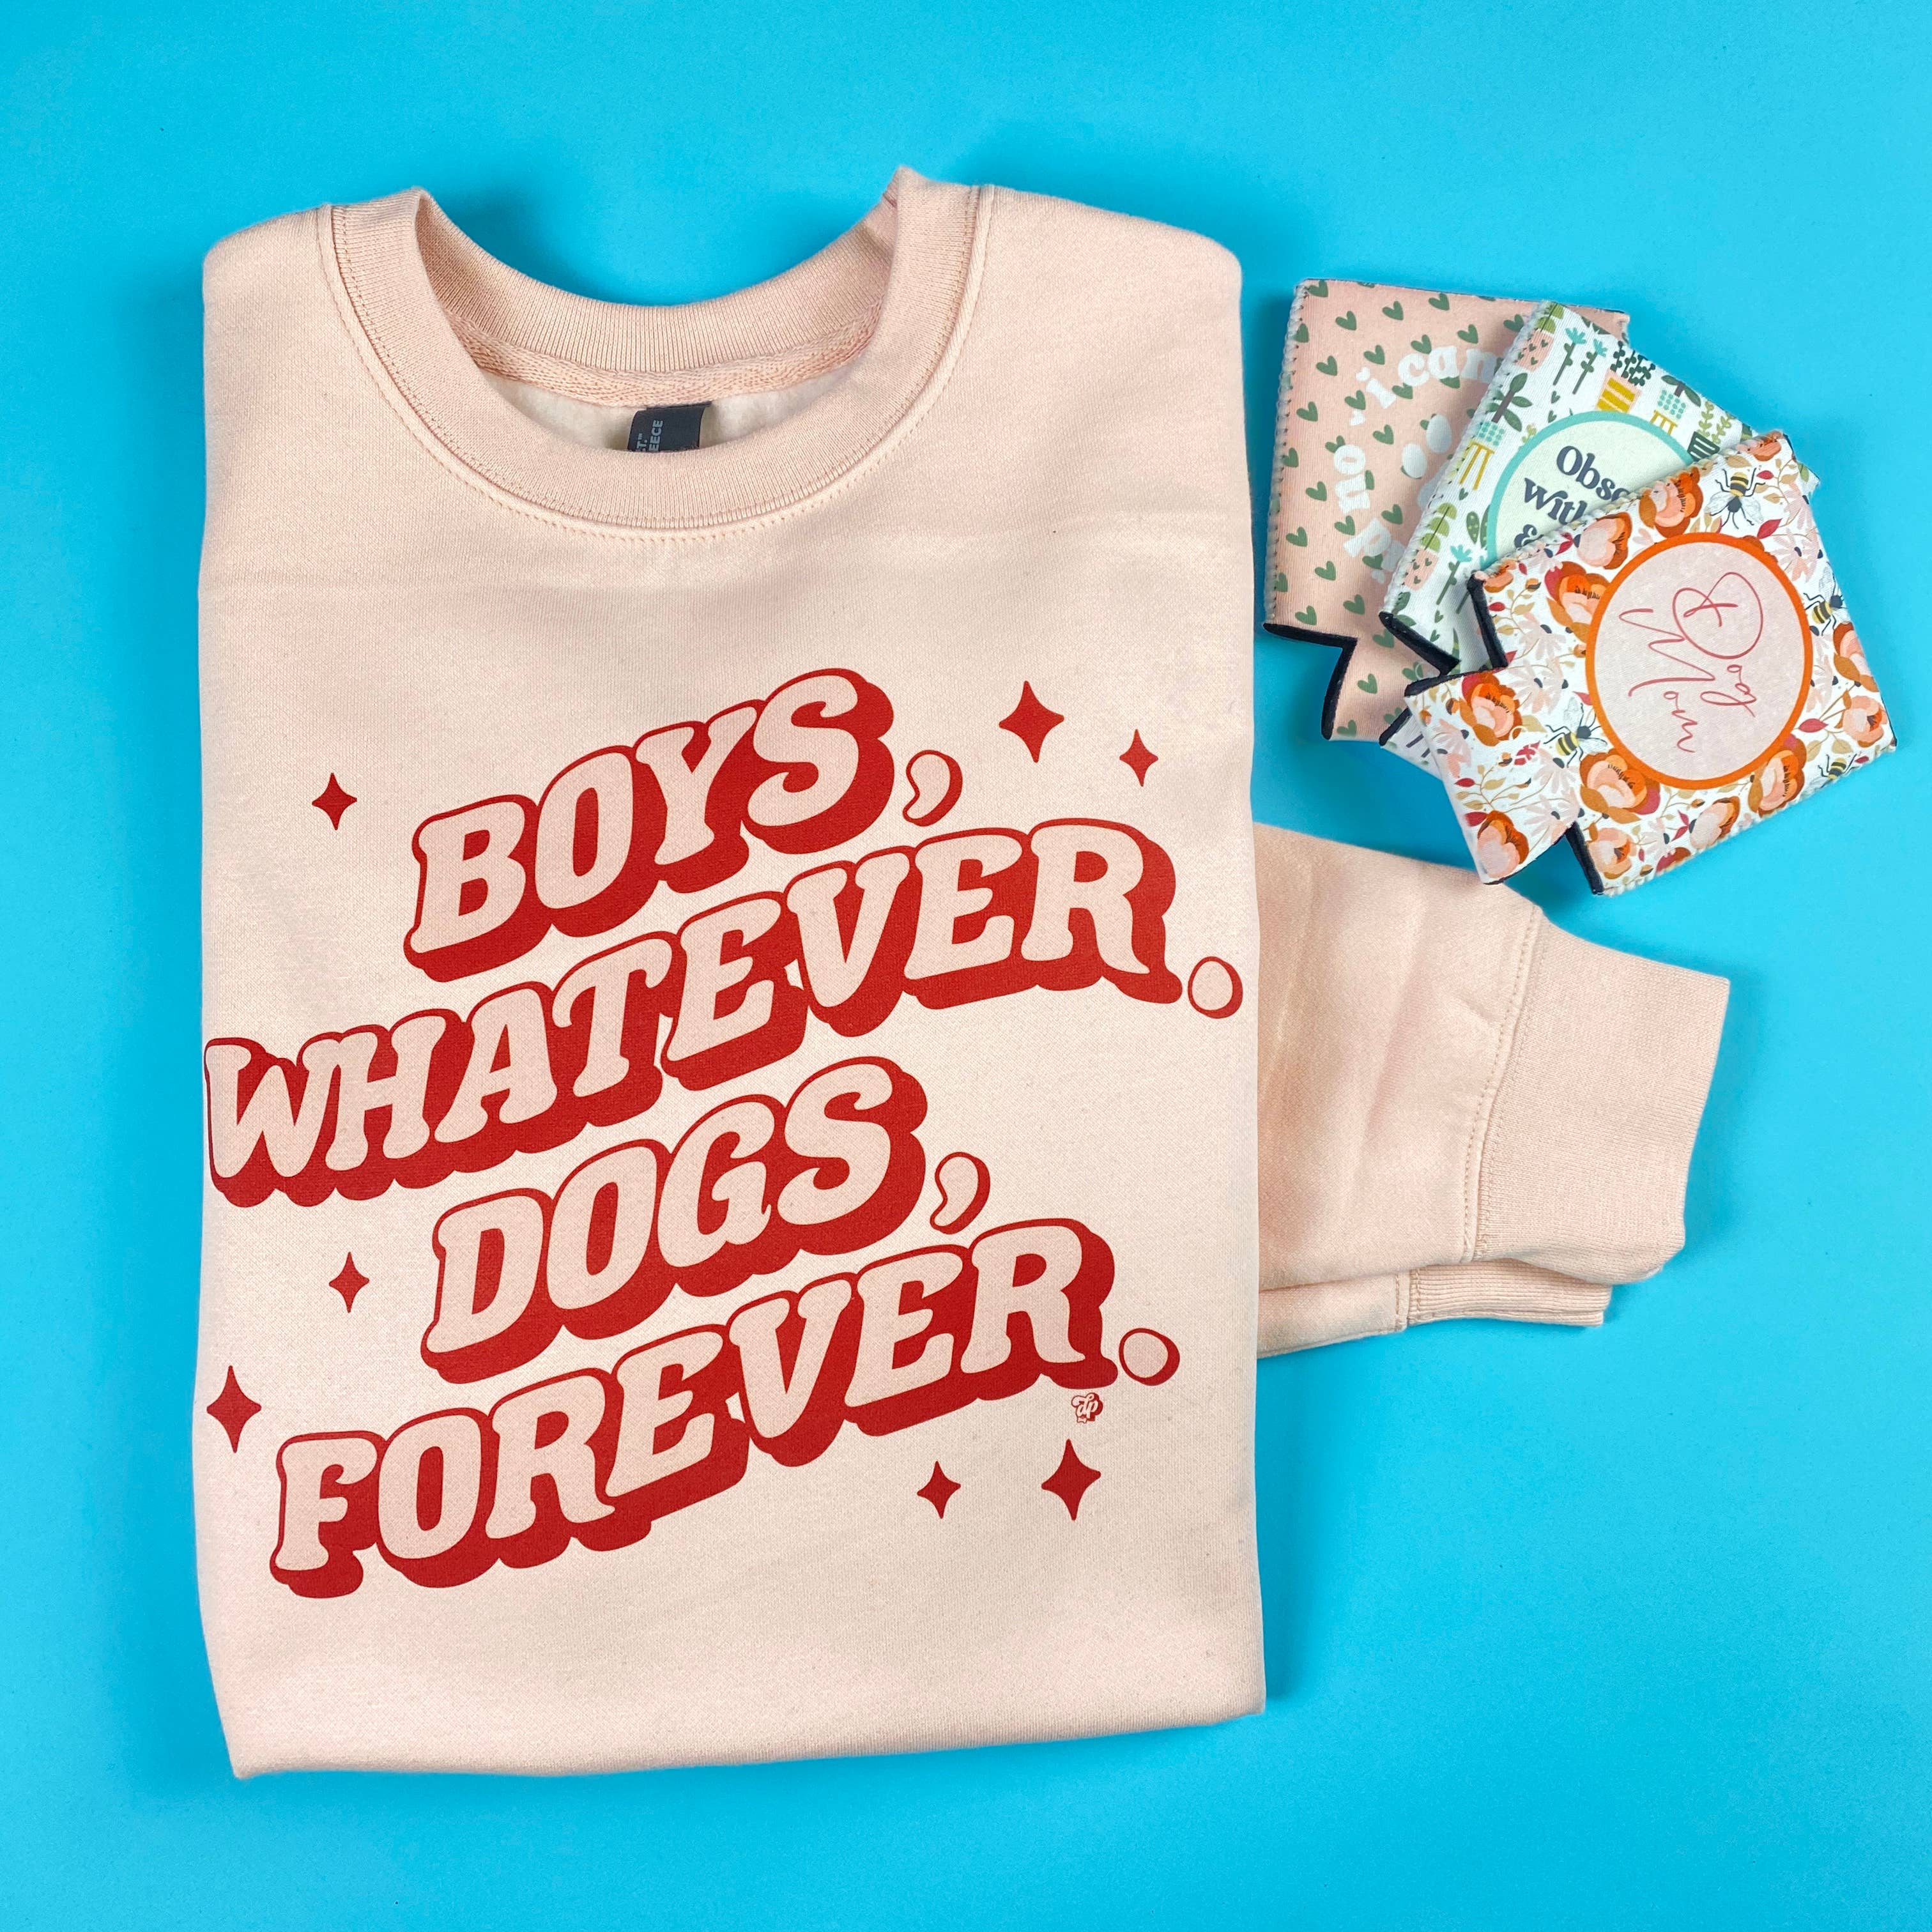 The Dapper Paw - Retro Wave Dogs Forever (Sweatshirt or Tee) | DP1135